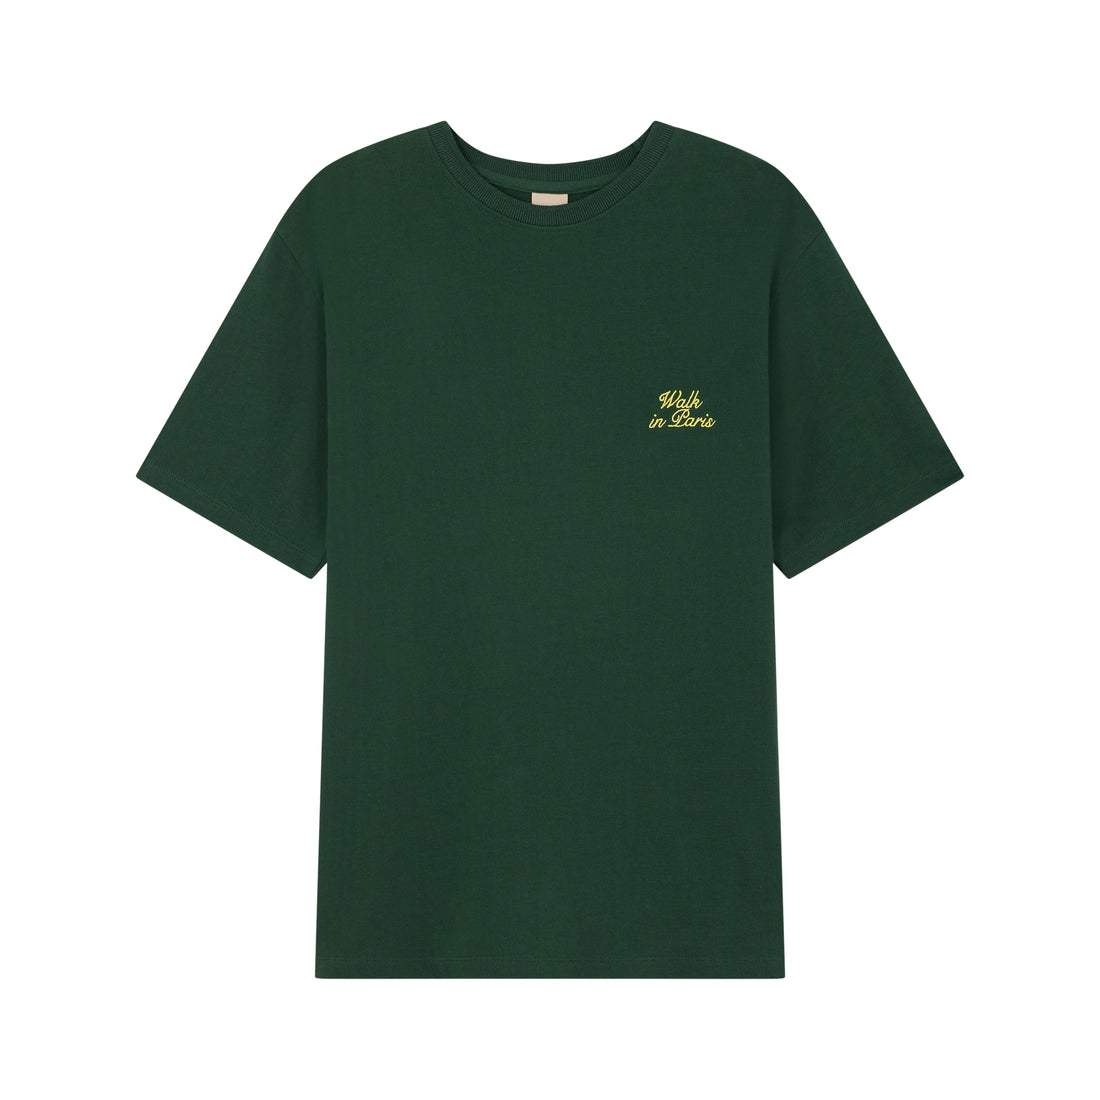 The sequoia embroidered t-shirt